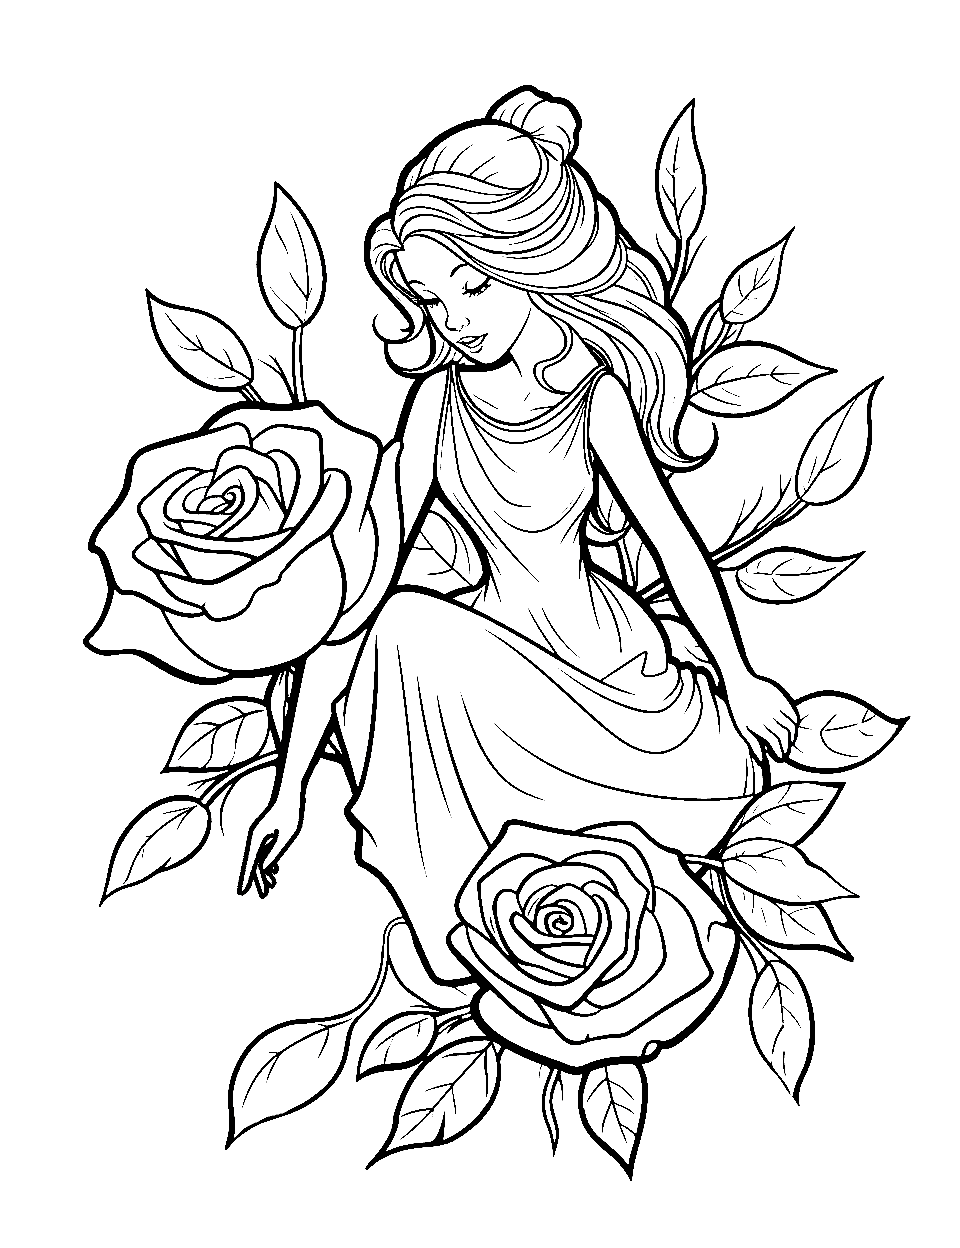 Fairy Resting on a Rose Garden Coloring Page - A dainty fairy taking a rest in a rose garden of blooming roses.